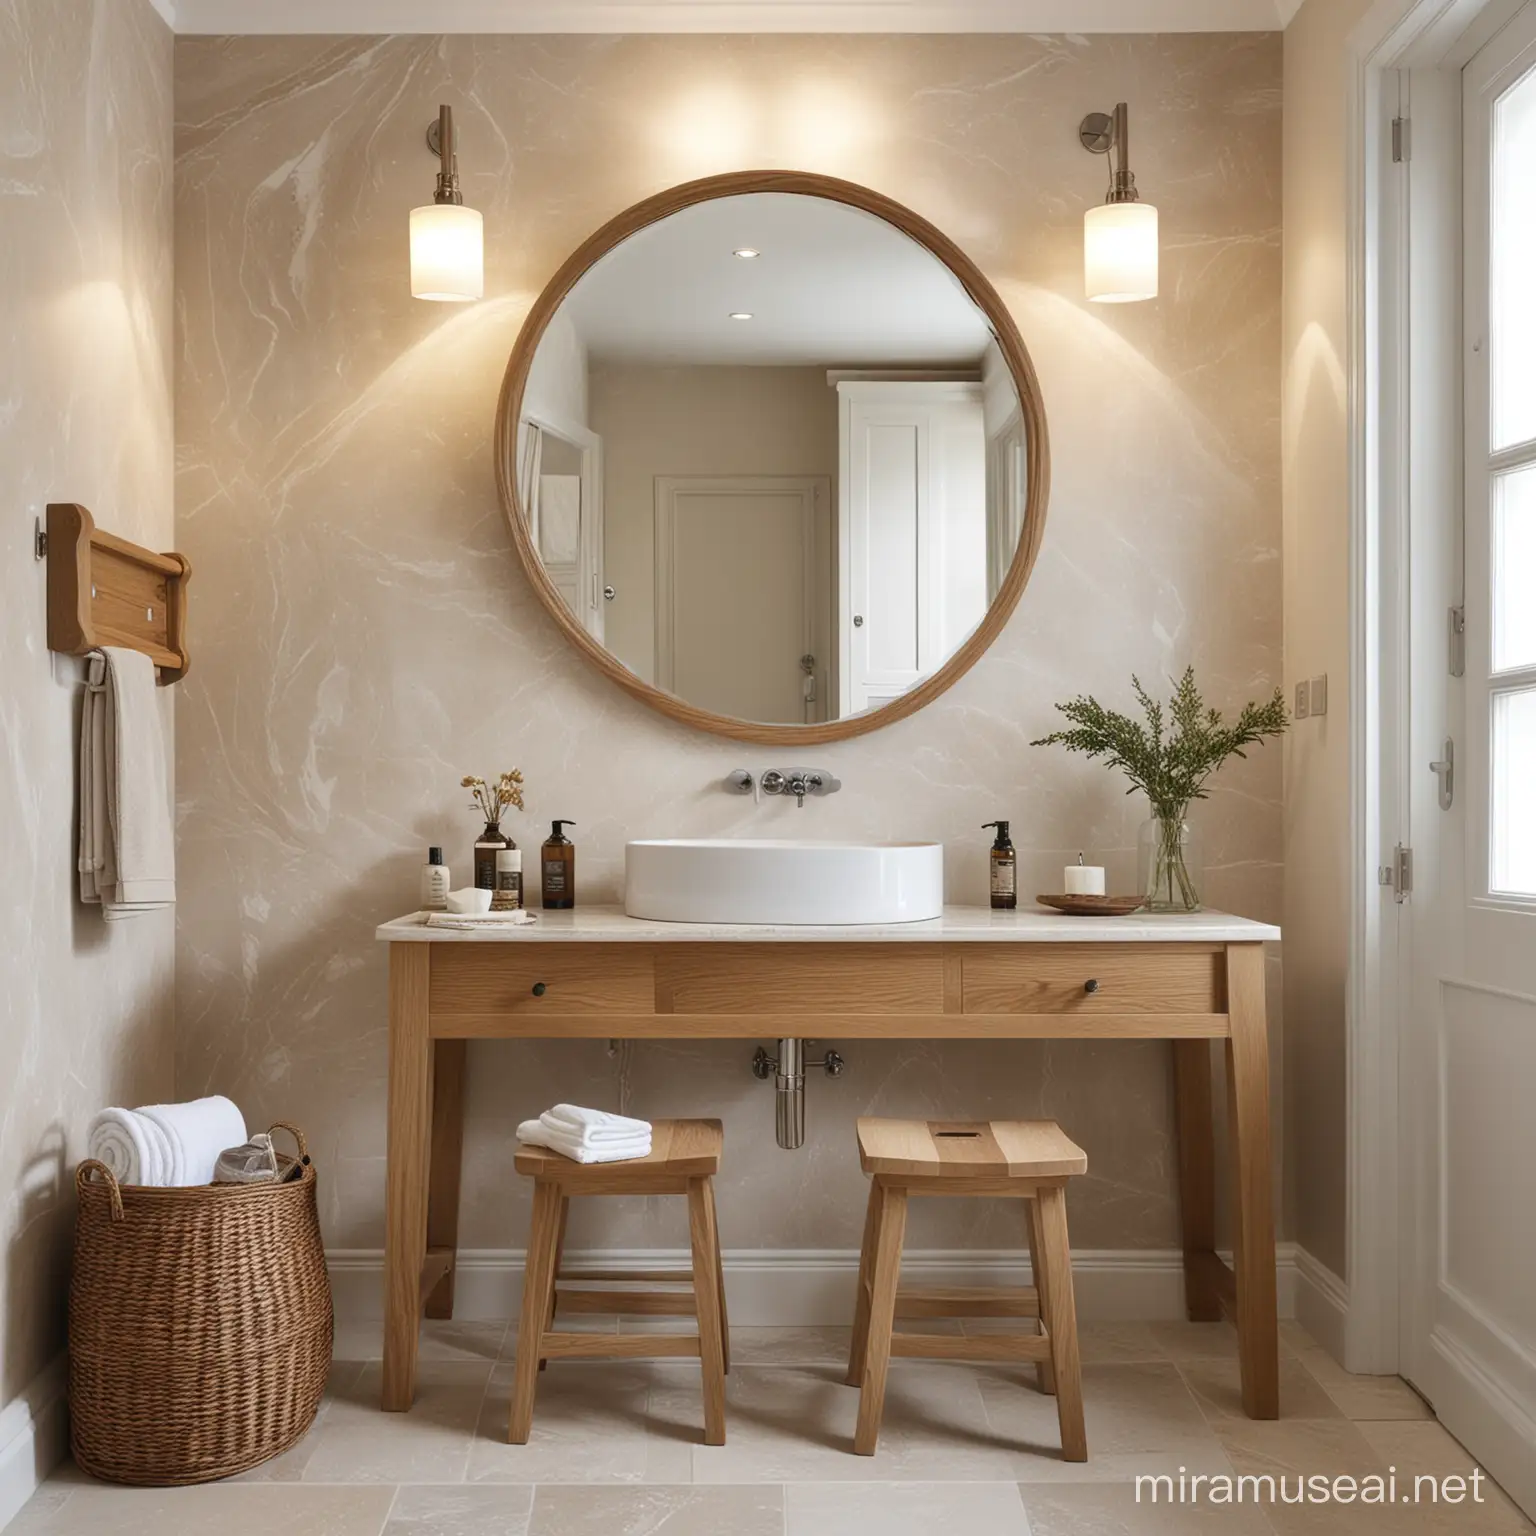 bathroom, country style, oak, white, cream, brown, marble, mirror, wooden stool, wall lamp